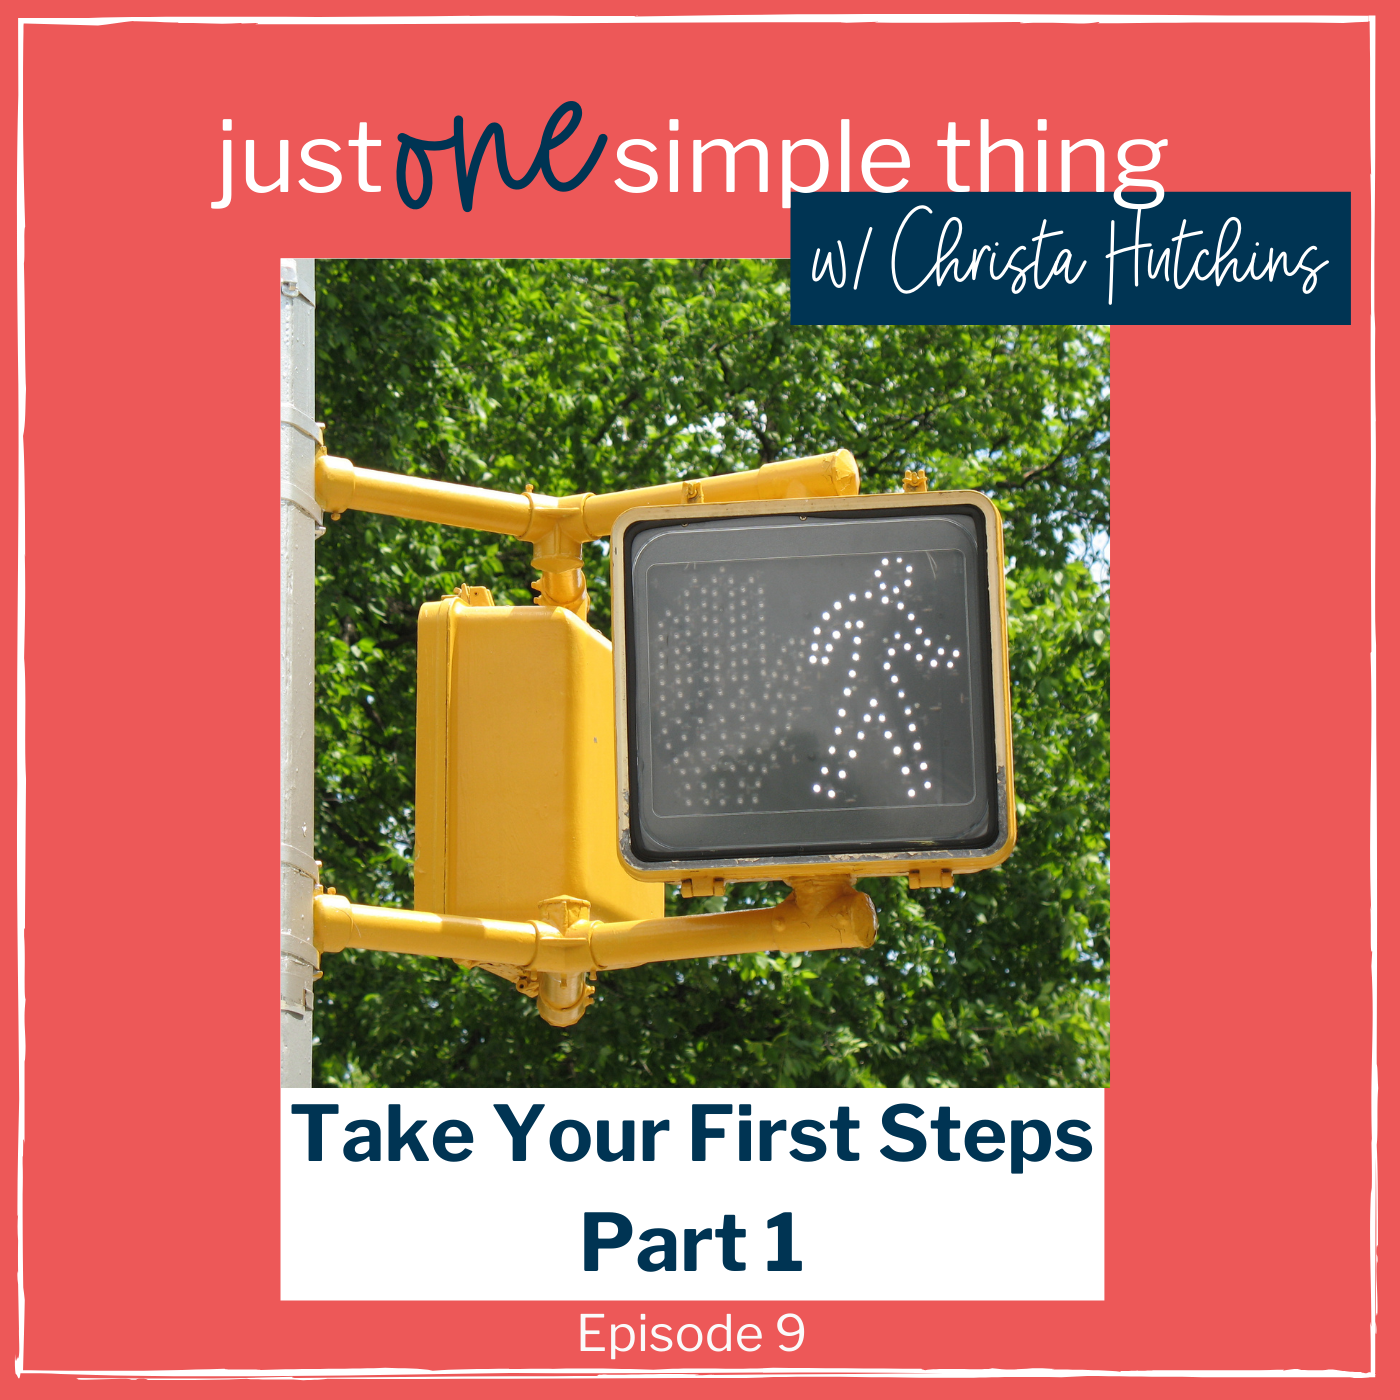 Take Your First Steps Part 1